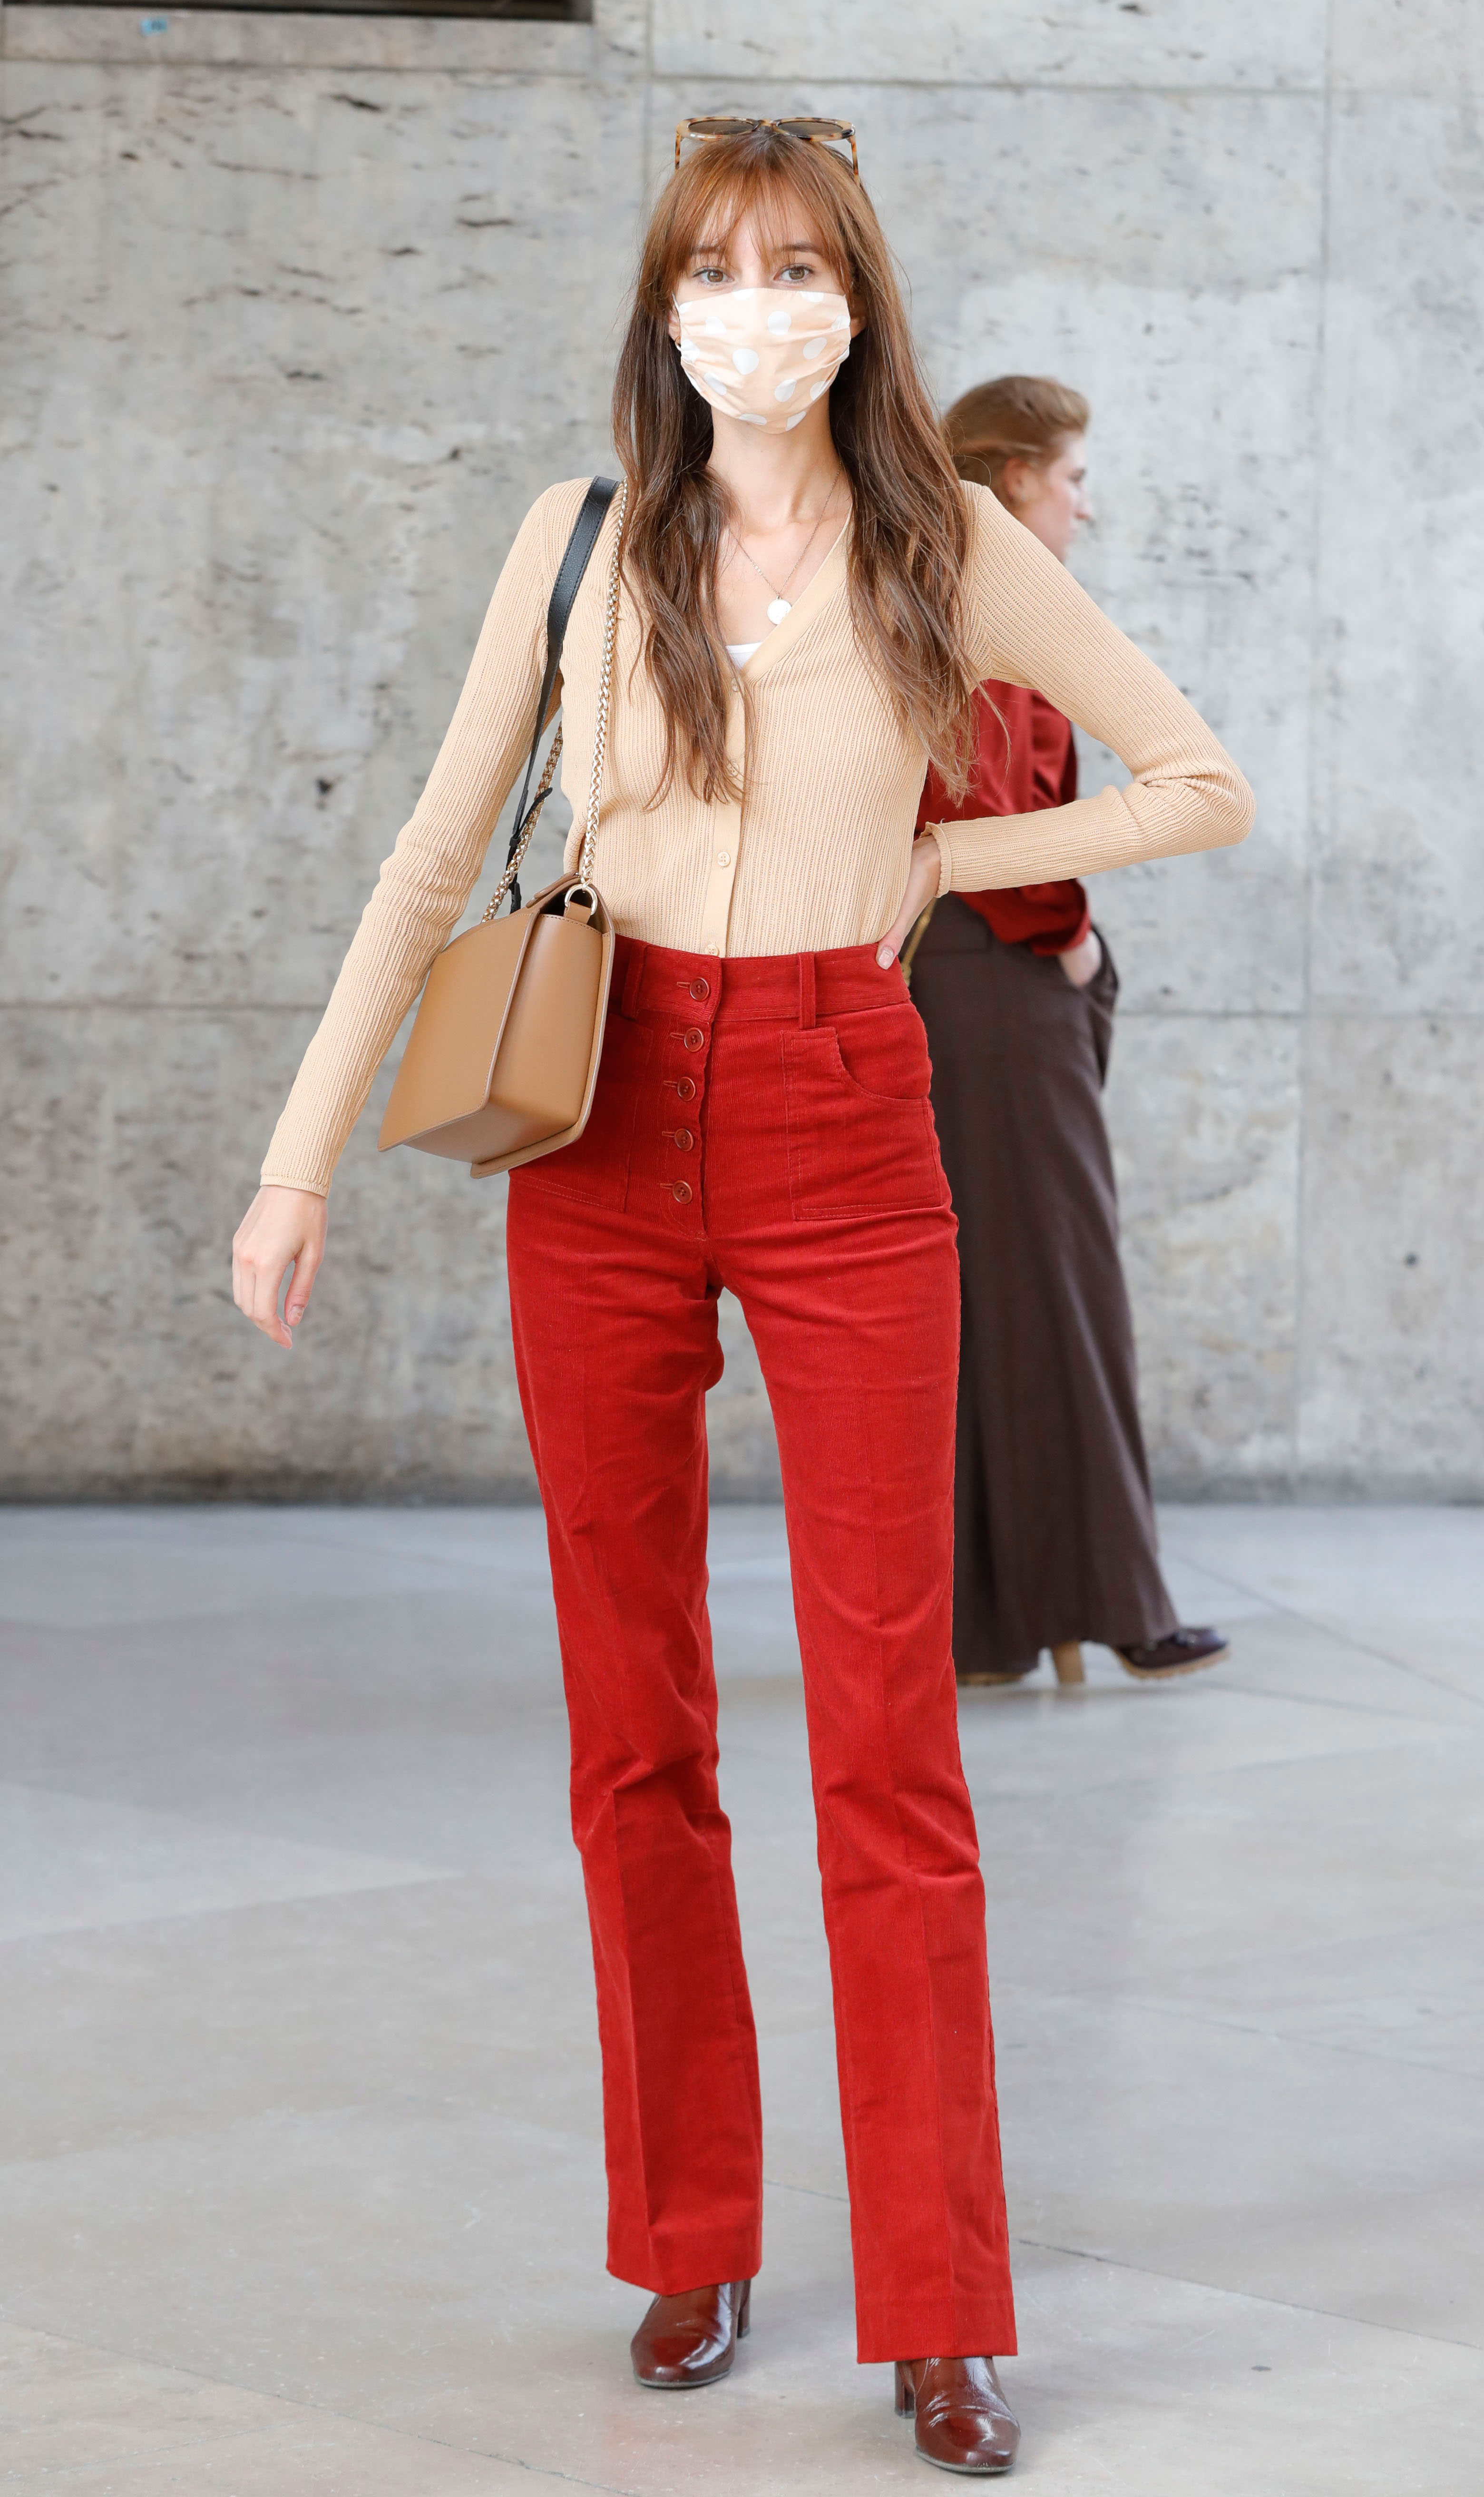 Paris Fashion Week Street Style: Woman wears a beige top, mask, and red high-waisted pants.